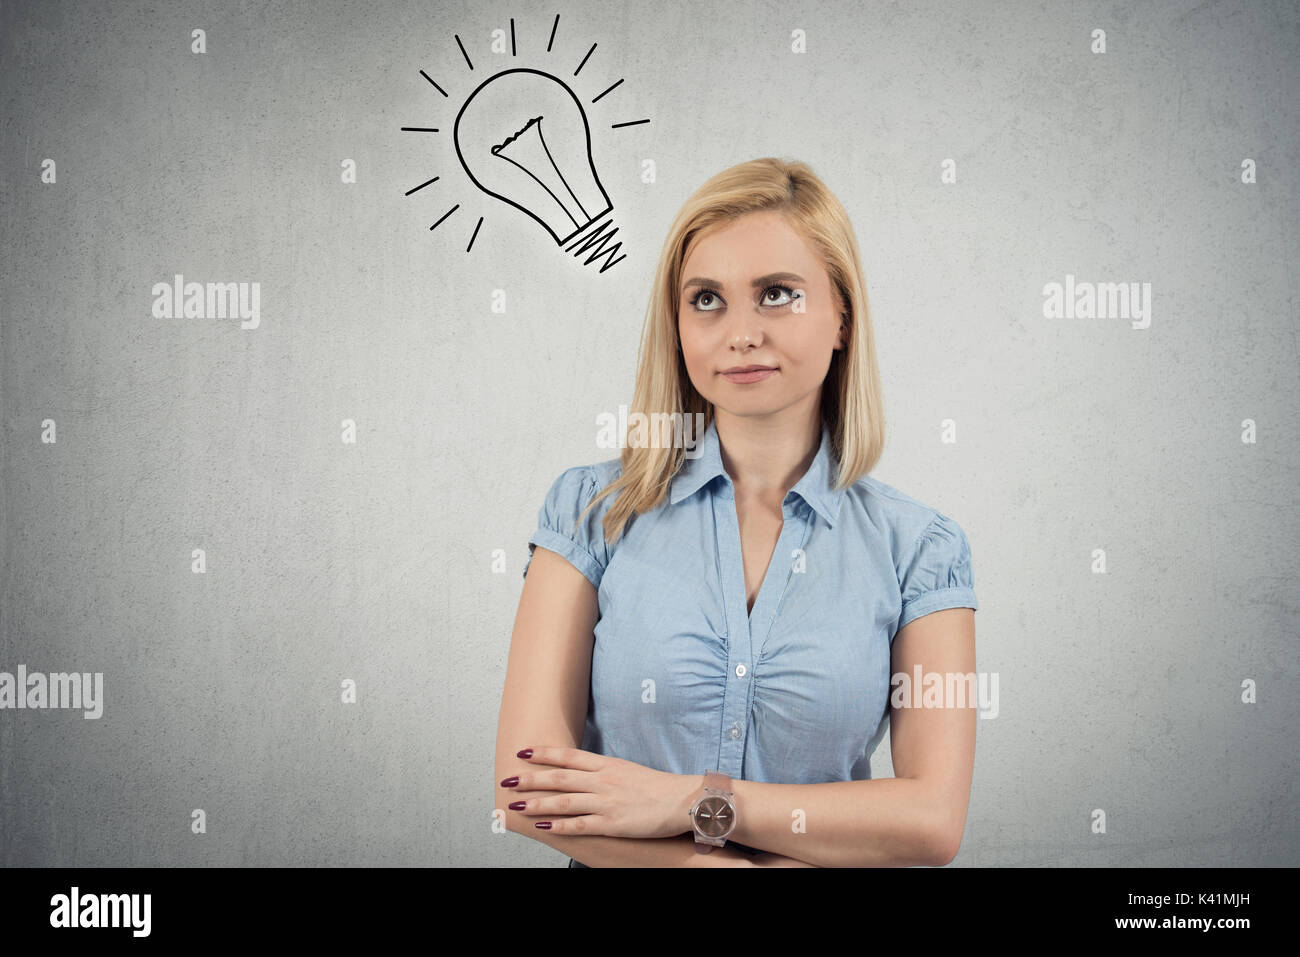 Smiling young woman having an idea with light bulb over her head Stock Photo